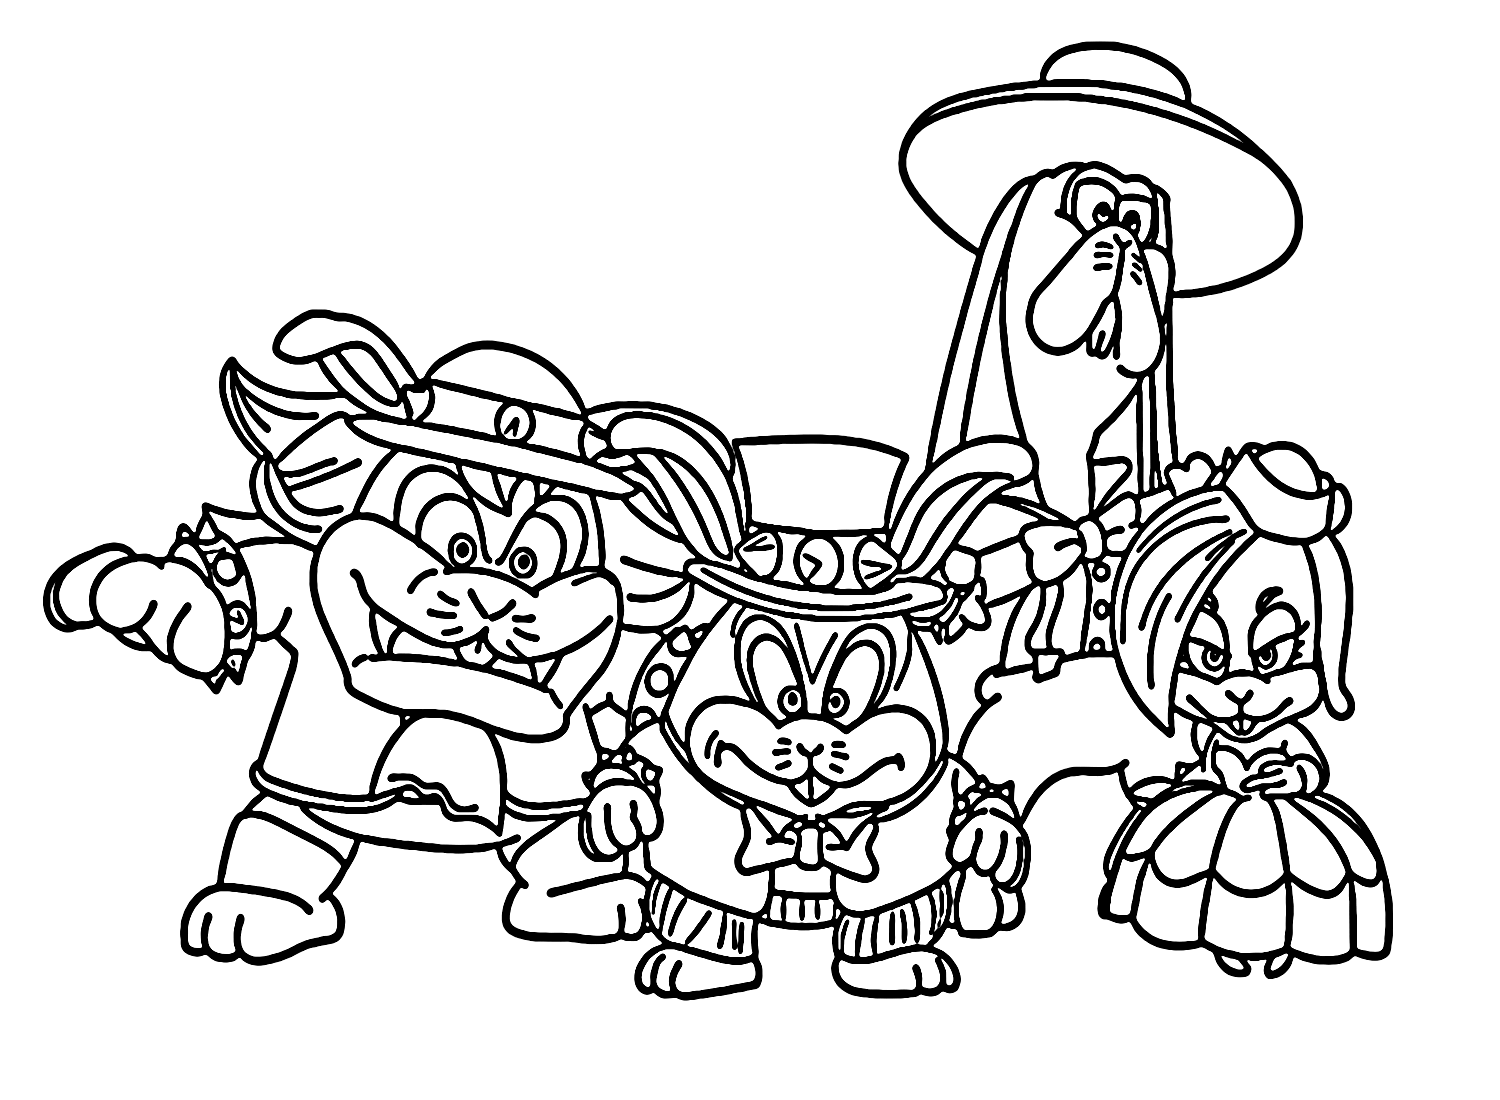 Super Mario Odyssey Images Coloring Pages